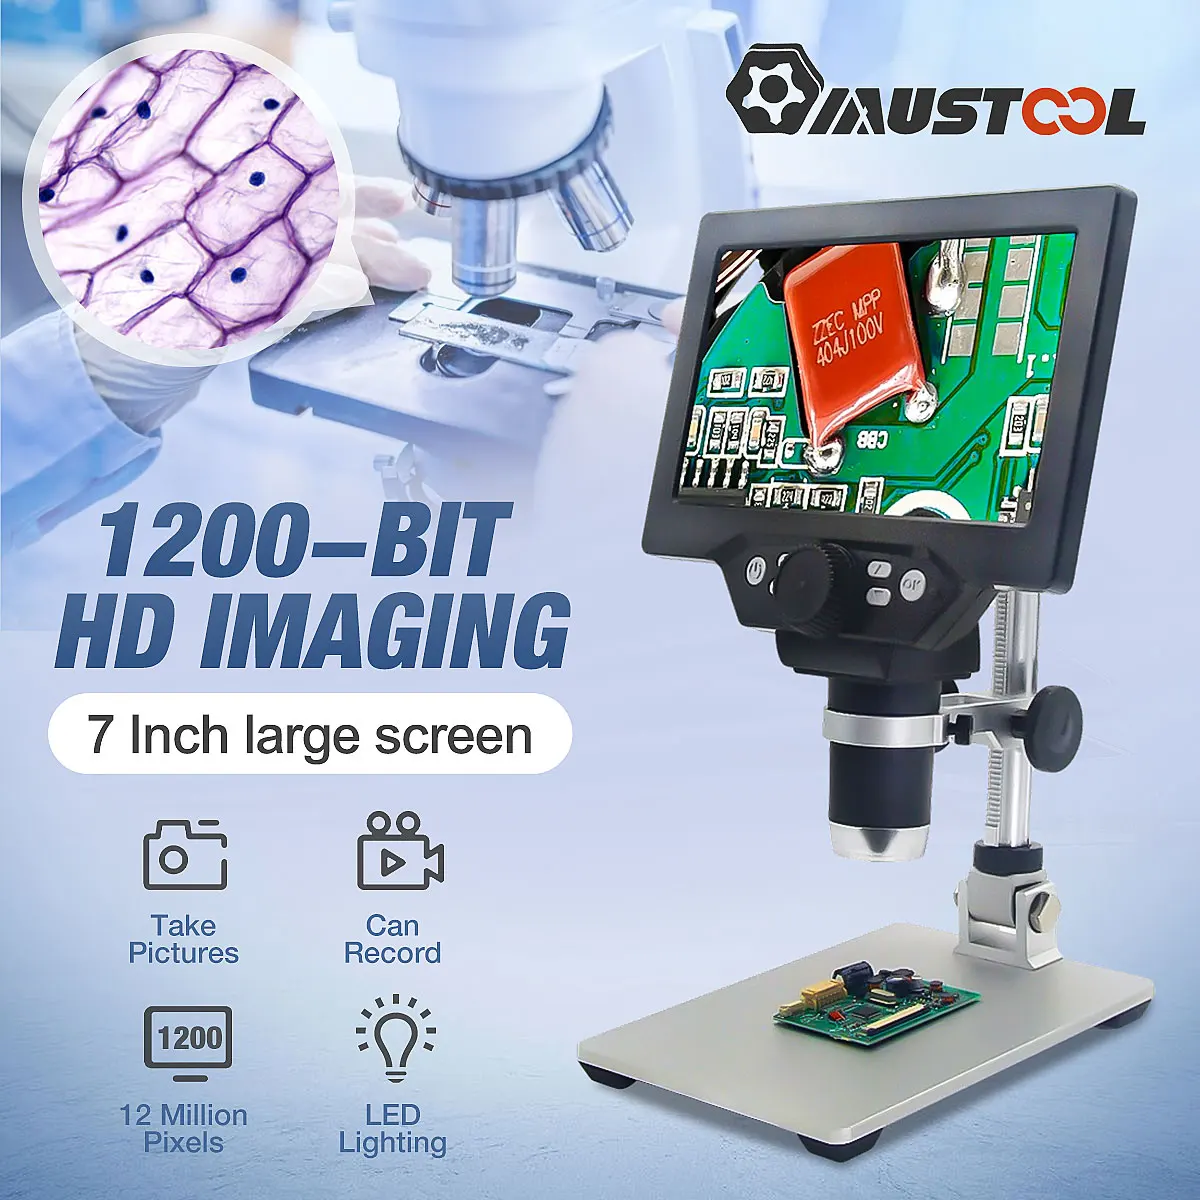 

MUSTOOL G1200 Electronic Digital Microscope 12MP 7 Inch Large Base LCD Display 1-1200X Continuous Amplification Magnifier Tool